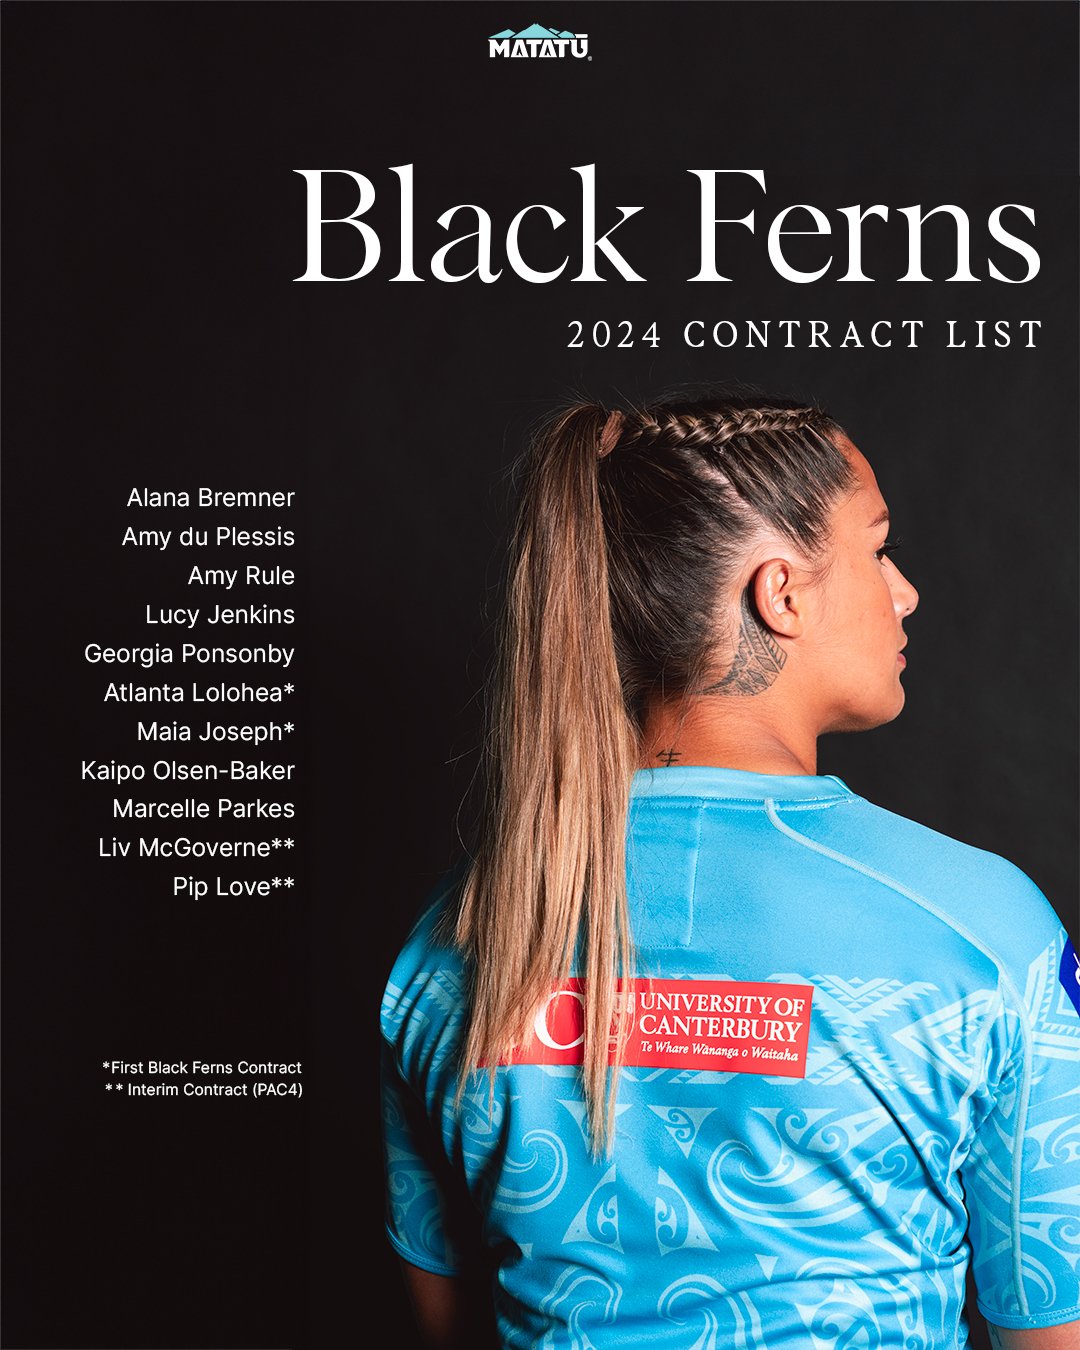 Onto the world stage 🤩

Special congratulations to Atlanta Lolohea and Maia Joseph for their first contracts, and returning Black Ferns Marcelle Parkes and Kaipo Olsen-Baker.

Read more in our story